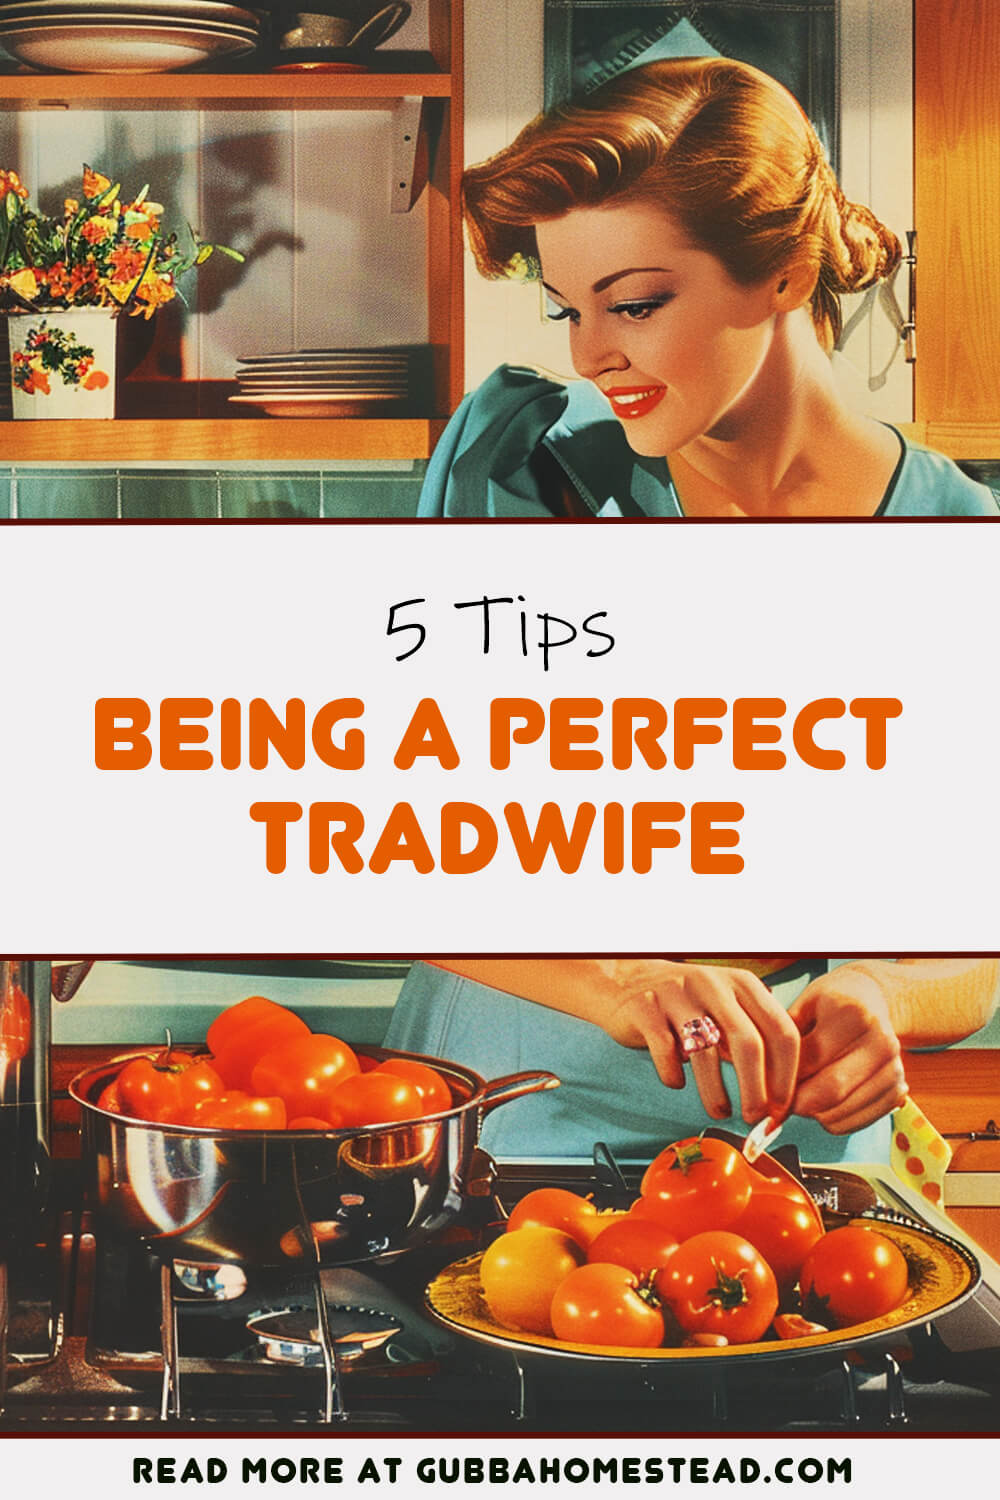 5 Tips To Being A Perfect Tradwife